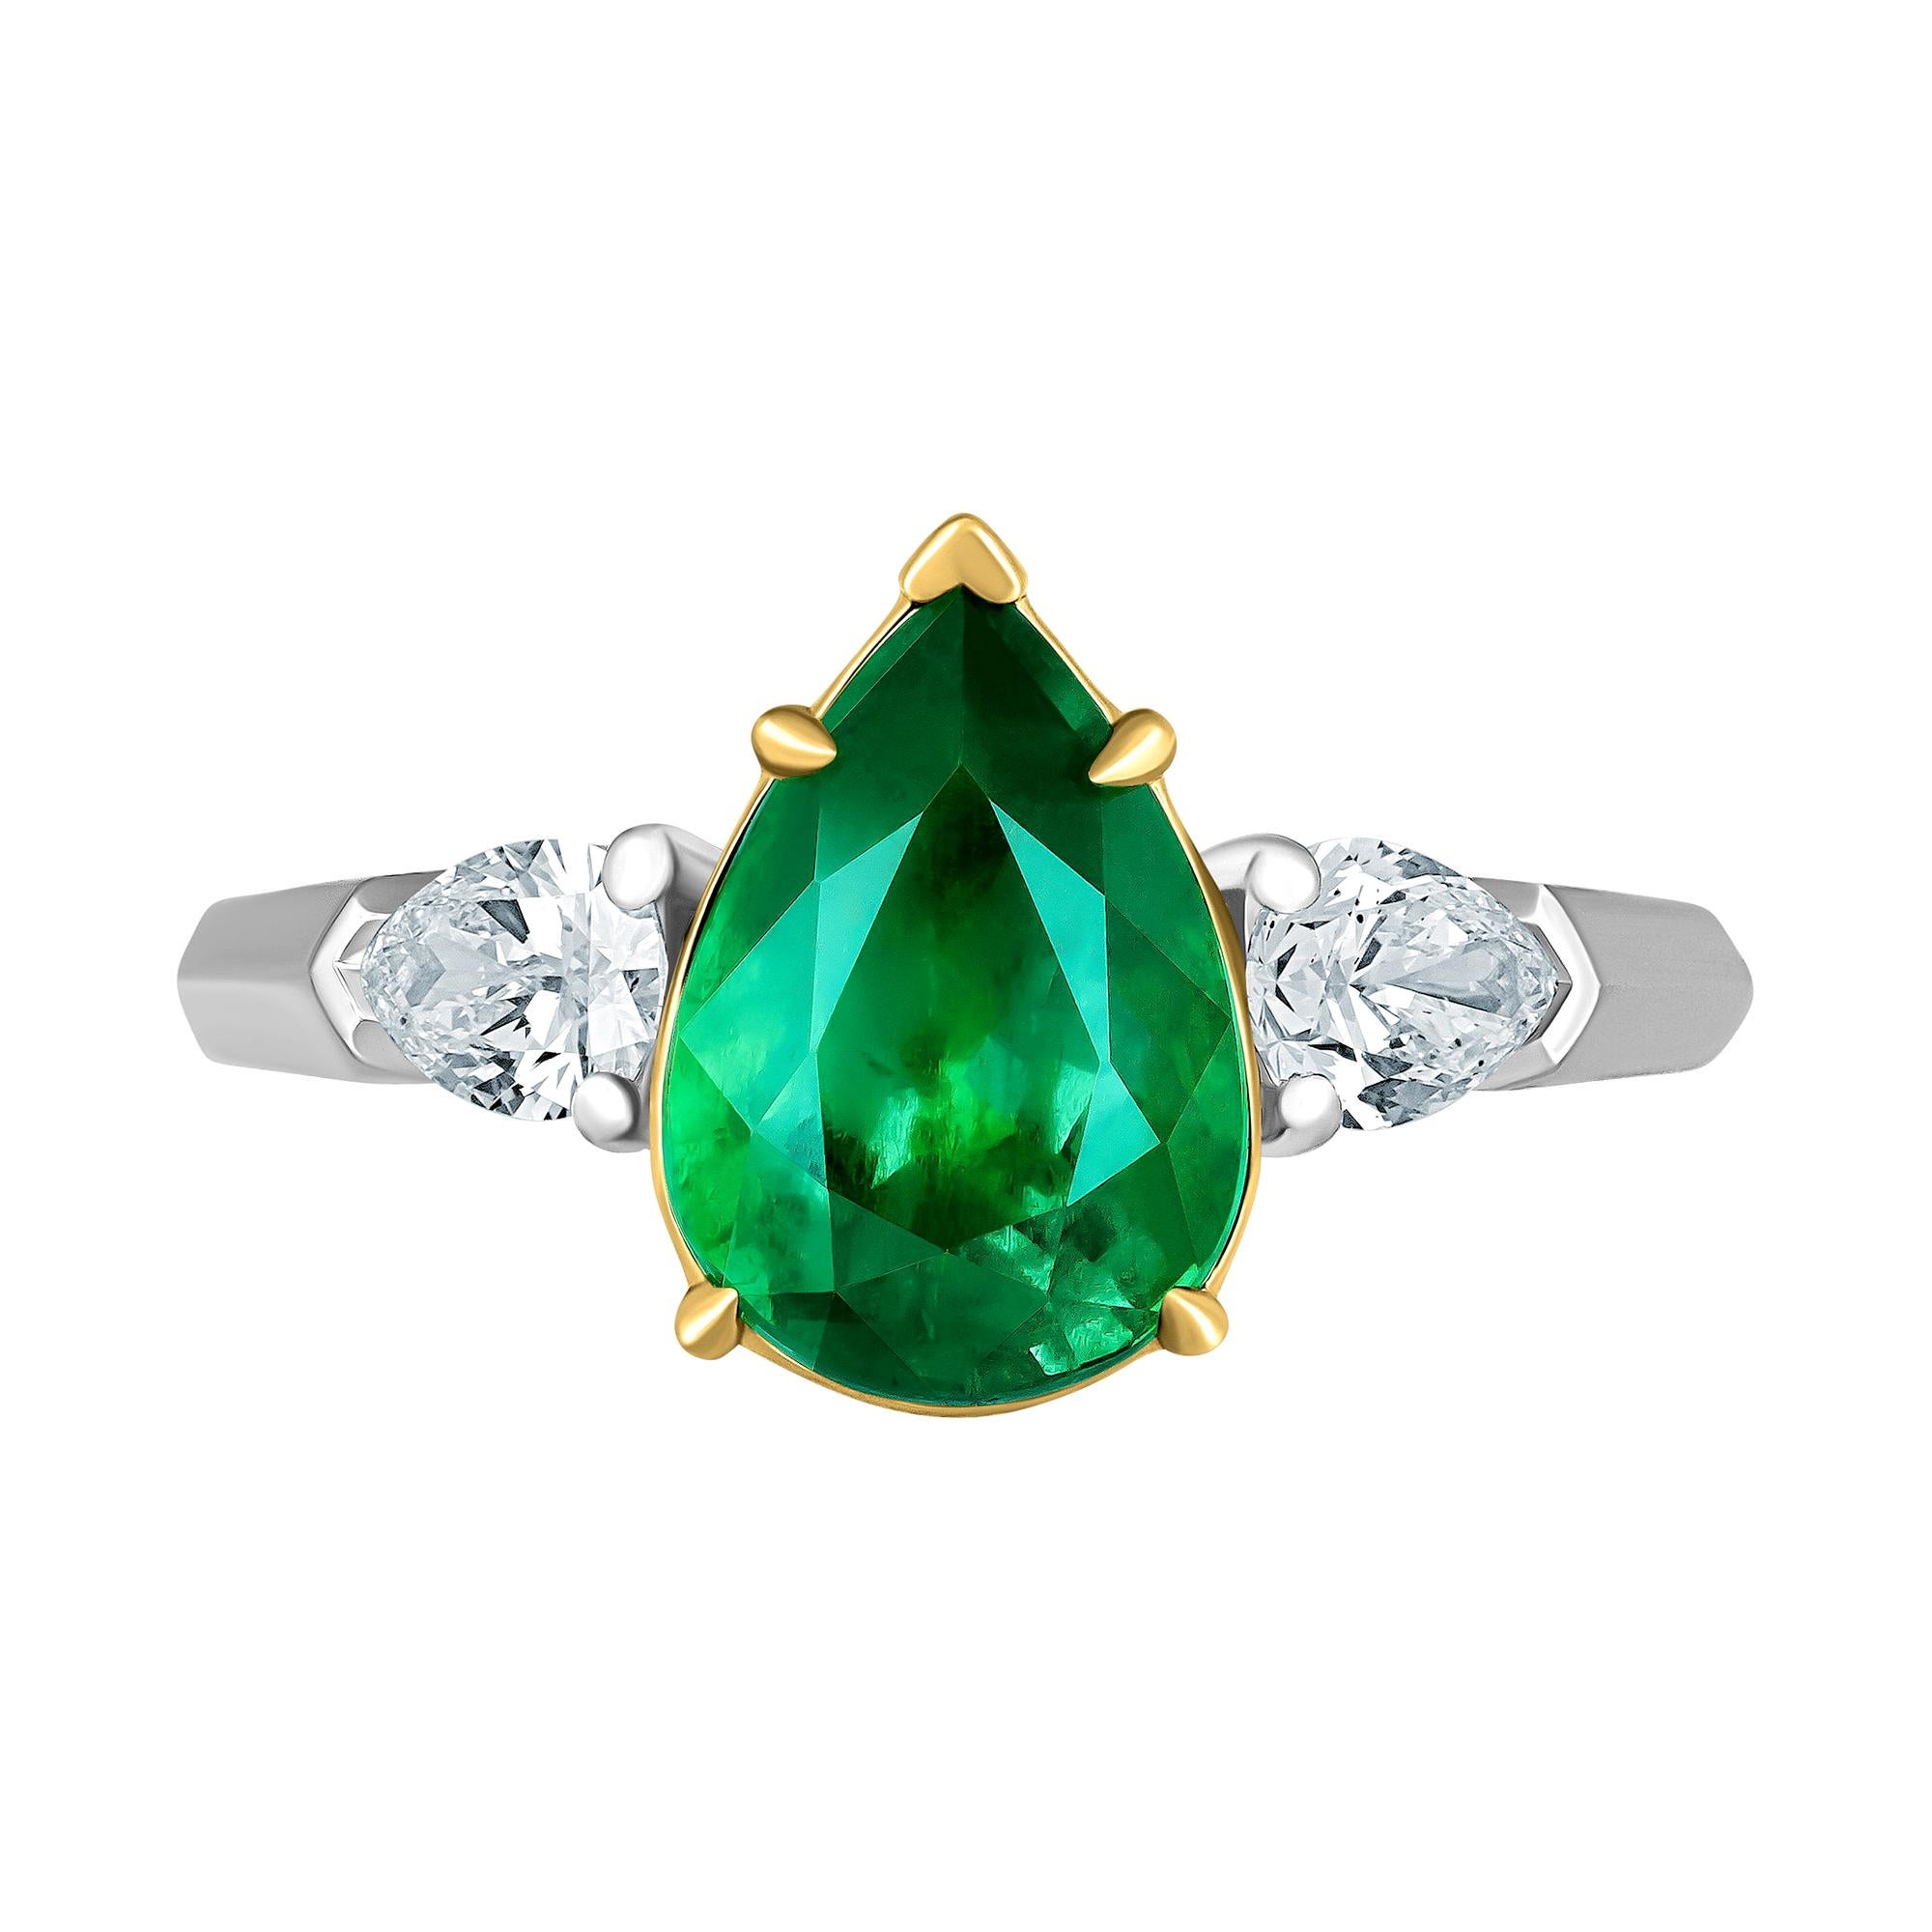 Emilio Jewelry 3.27 Carat Certified Colombian Vivid Green Emerald Diamond Ring For Sale